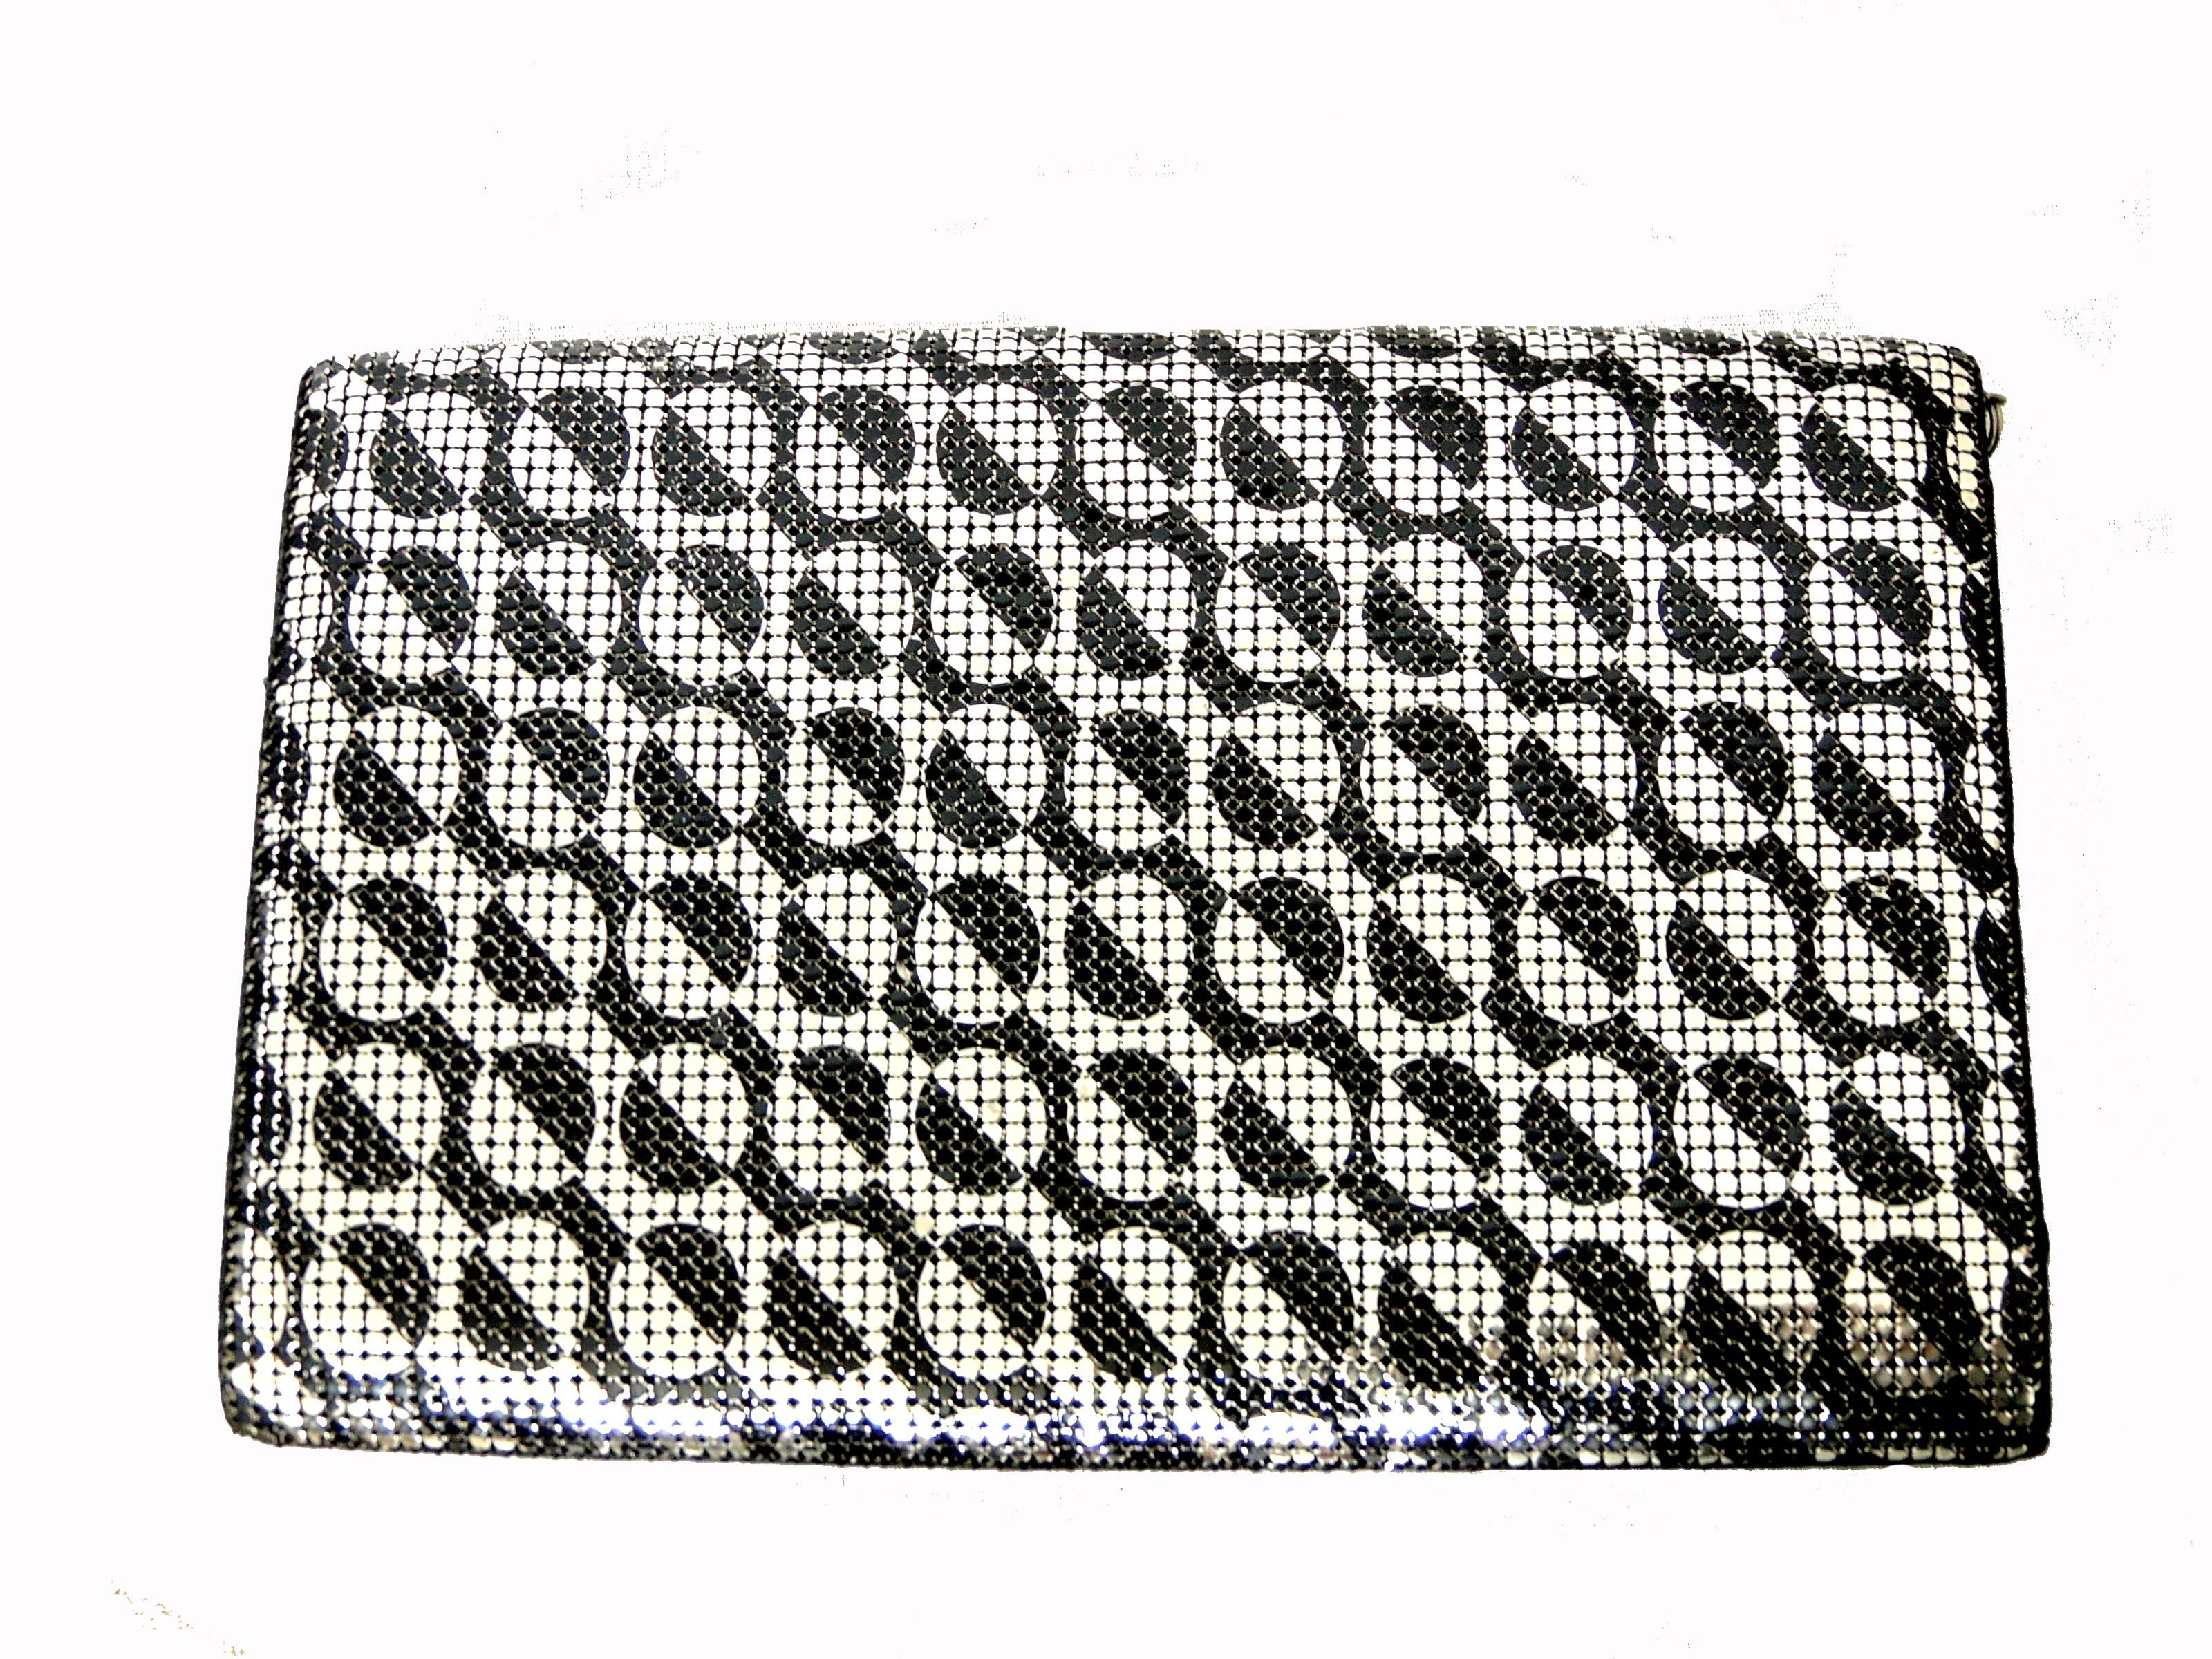 Mod Pierre Cardin Clutch Bag Purse with Black and Silver Mesh 1960s at ...